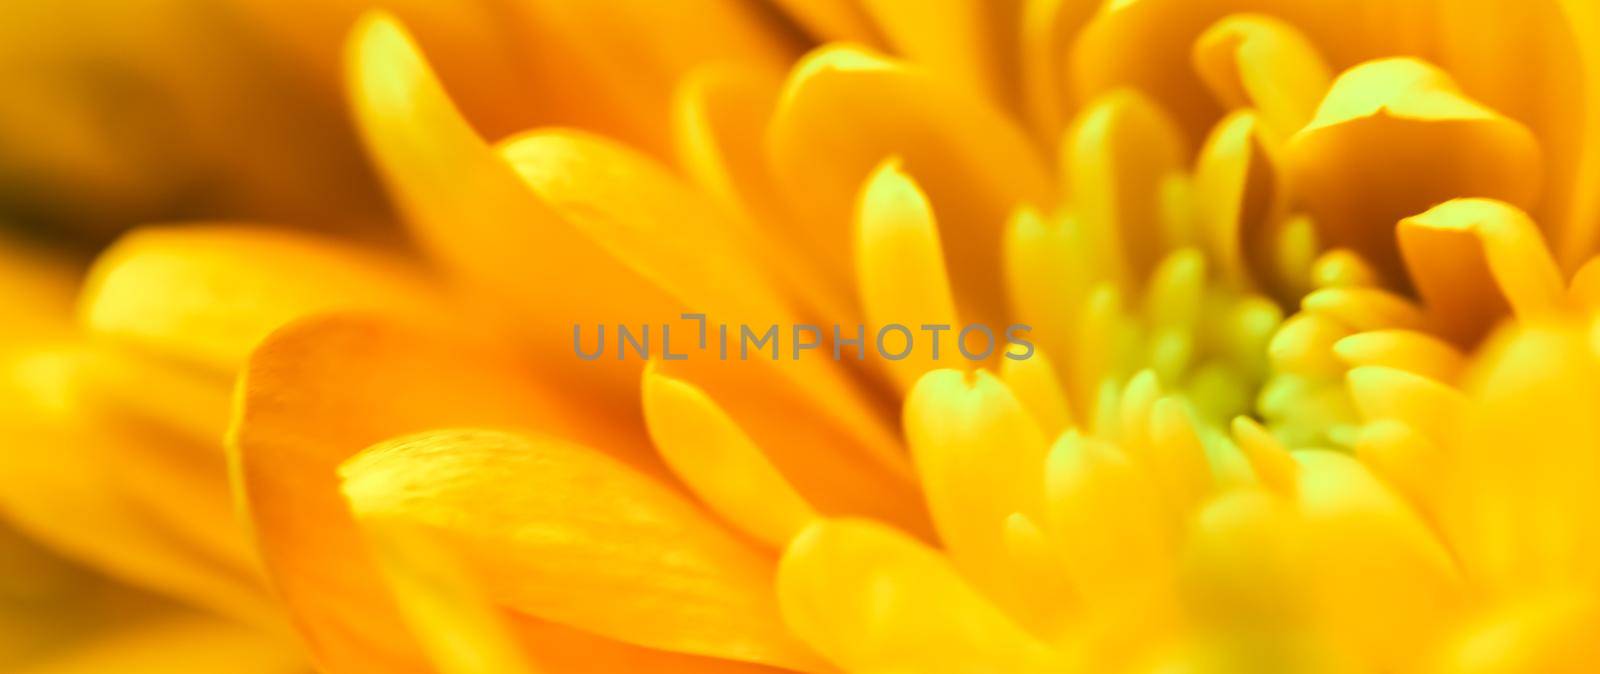 Abstract floral background, yellow chrysanthemum flower. Macro flowers backdrop for holiday brand design by Olayola